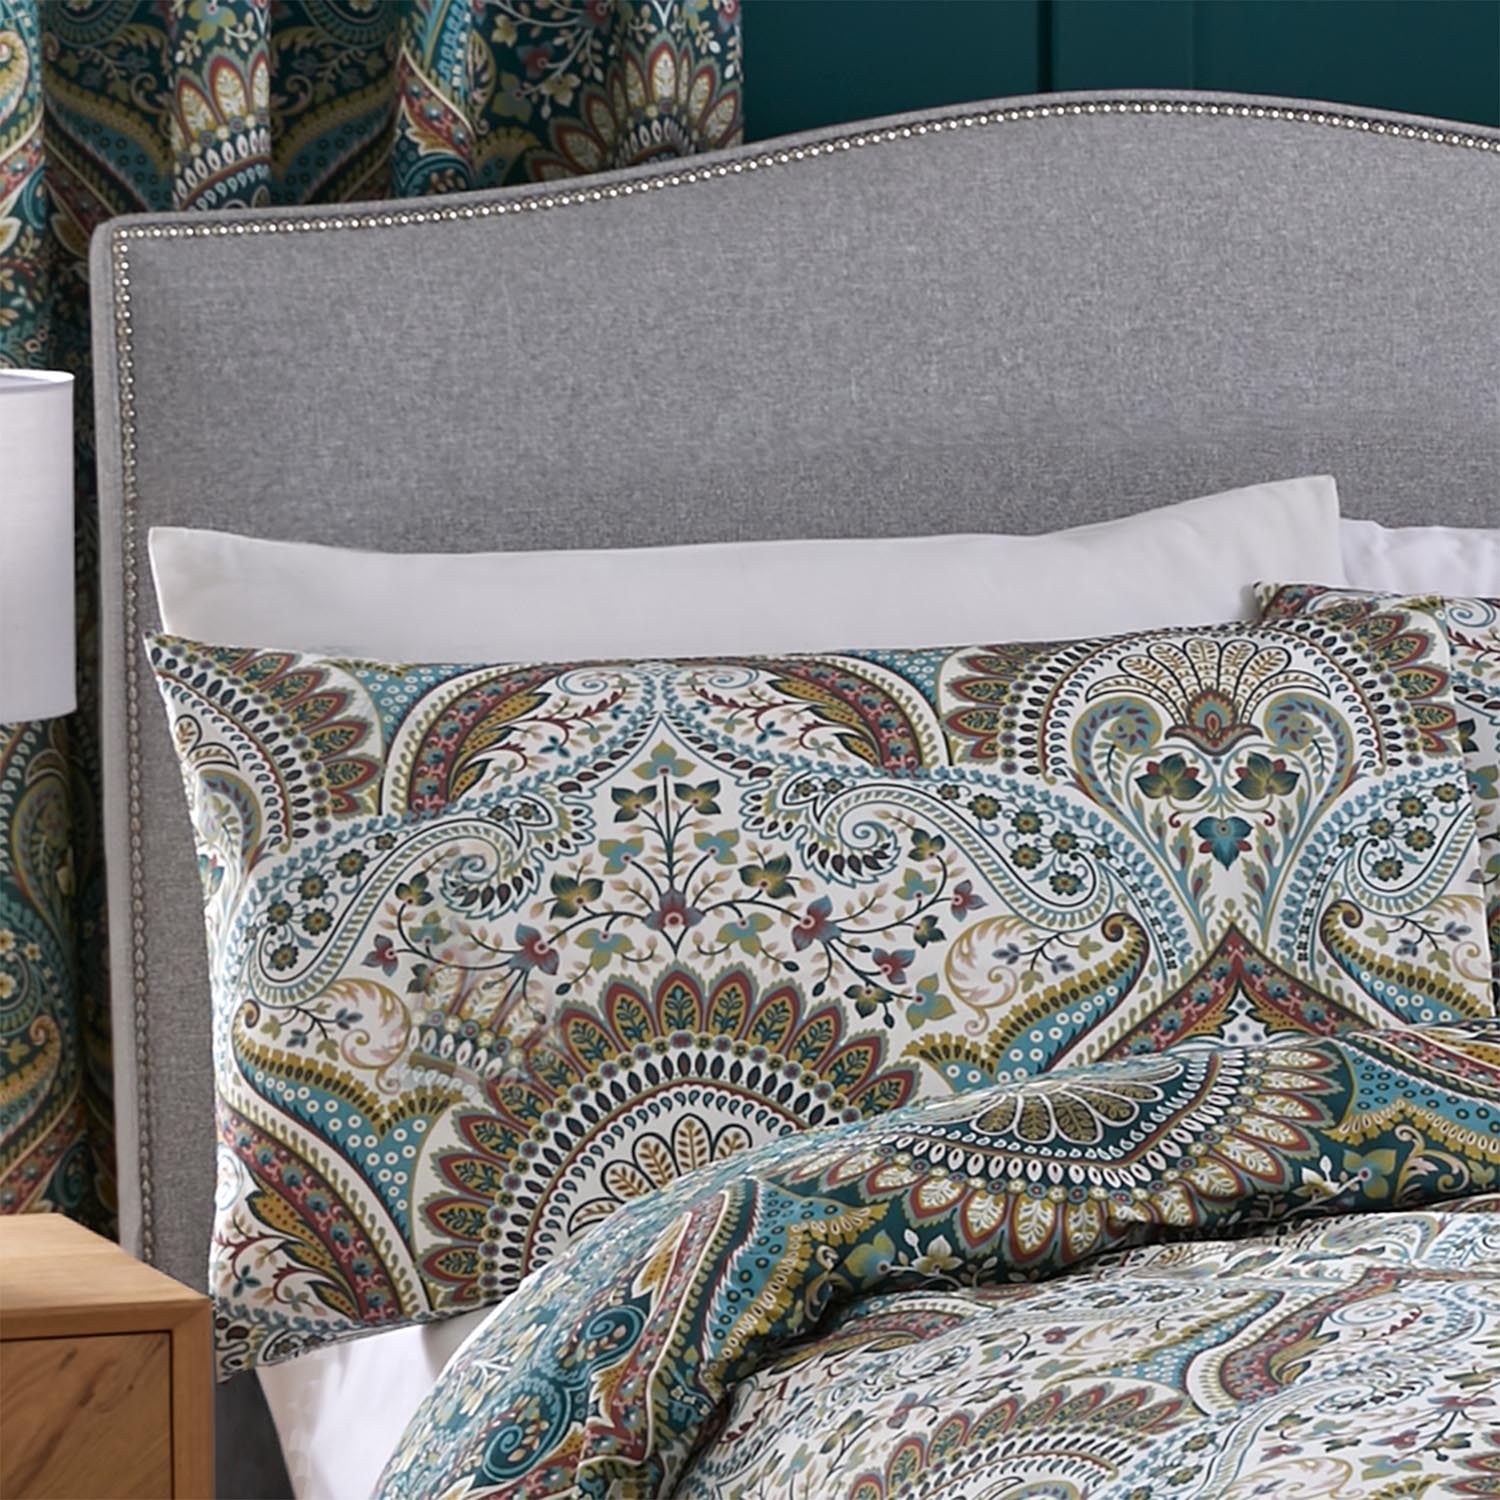 The Home Collection Palace Paisley Duvet Cover Set - Teal 8 Shaws Department Stores